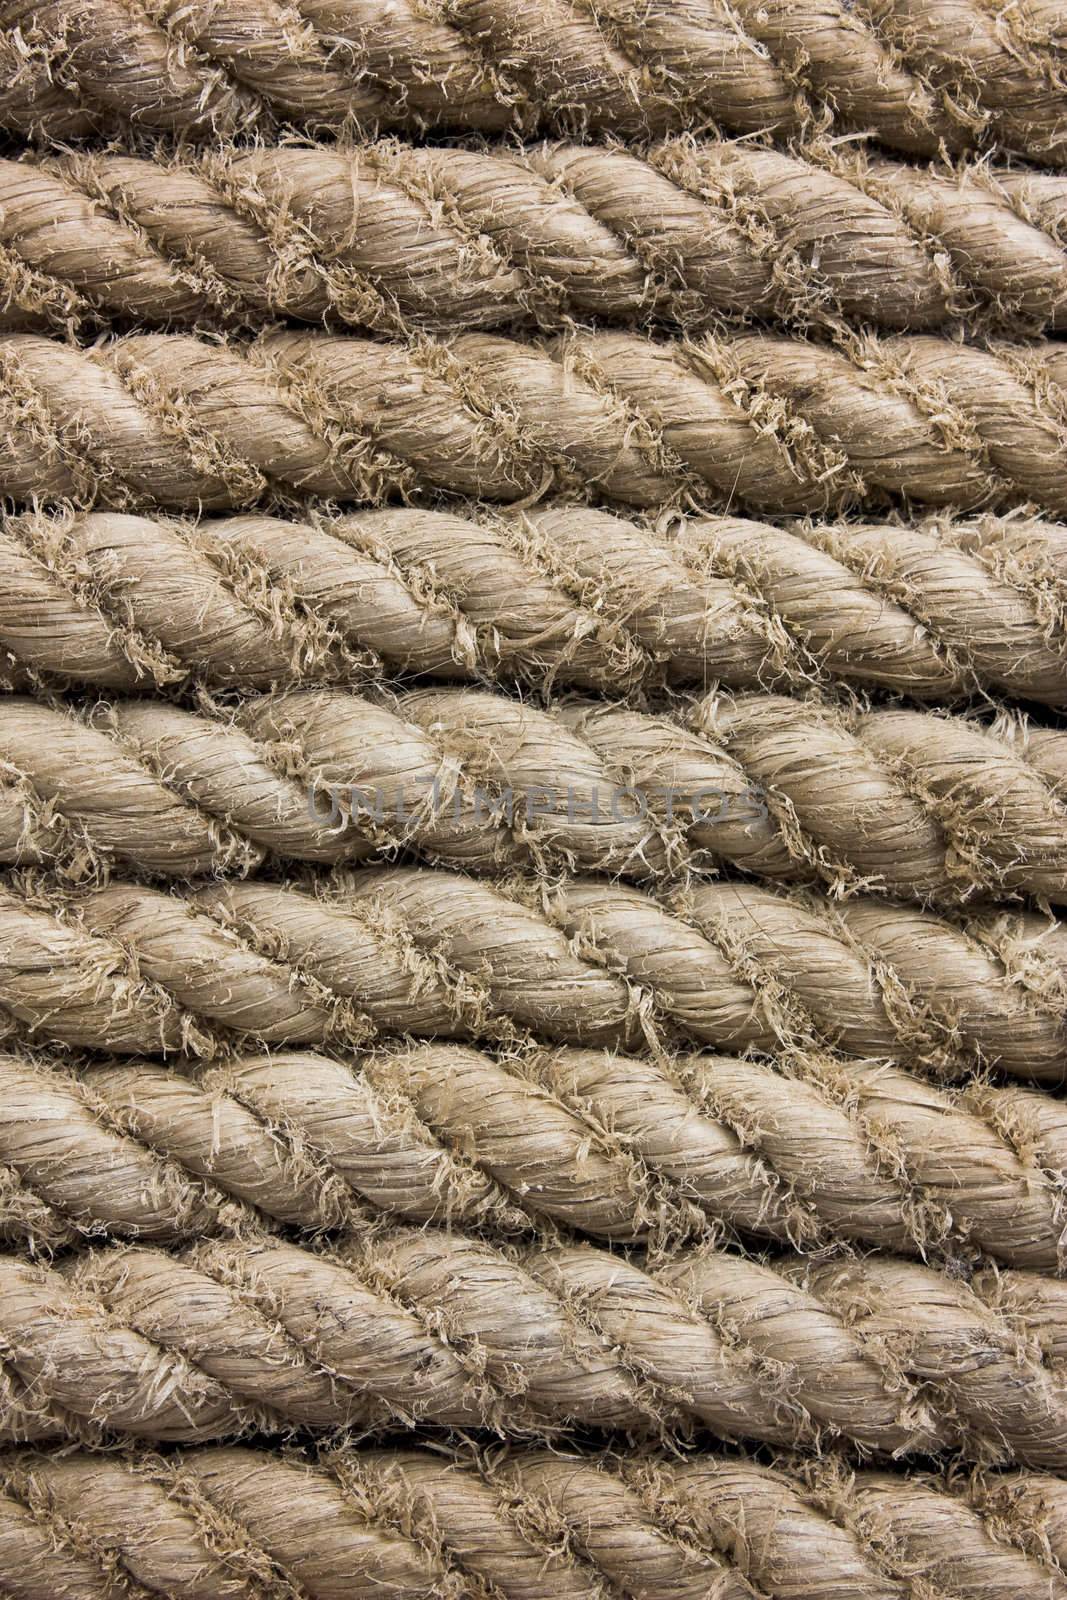 texture of the ropes by oleg_zhukov